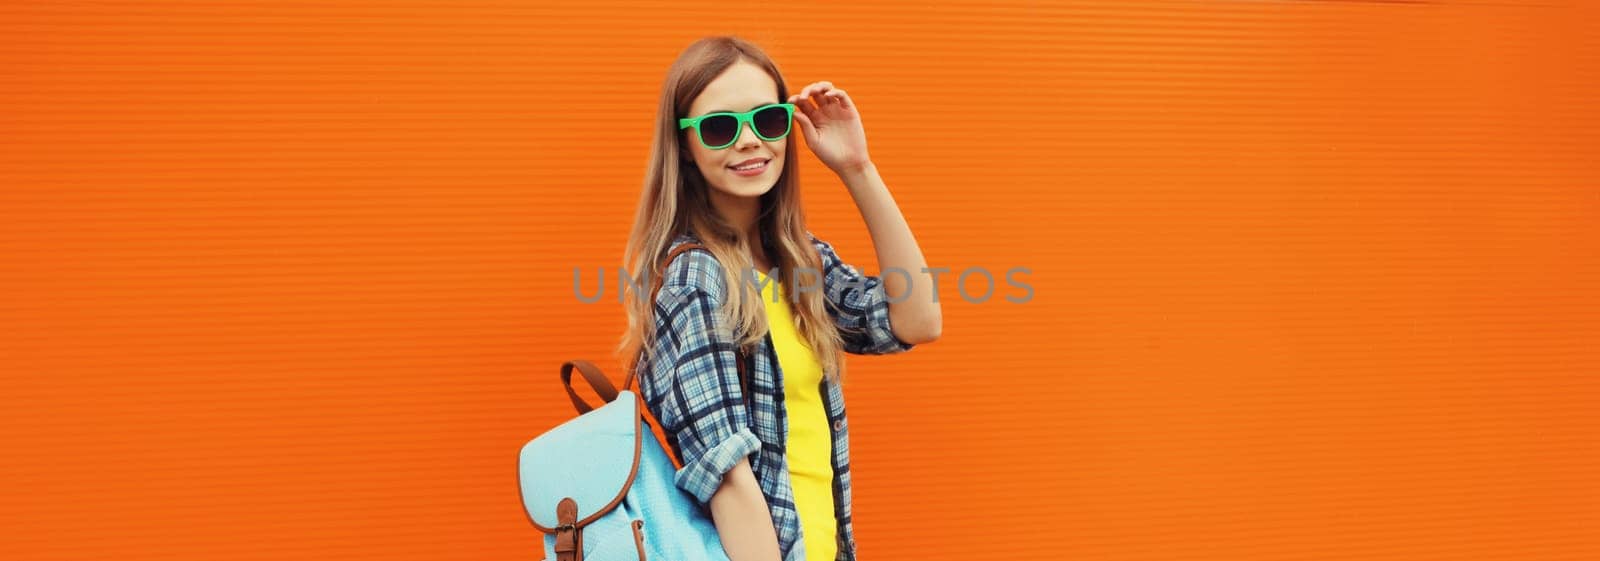 Summer portrait of happy cheerful stylish young woman with skateboard, backpack in colorful clothes posing on orange background on city street